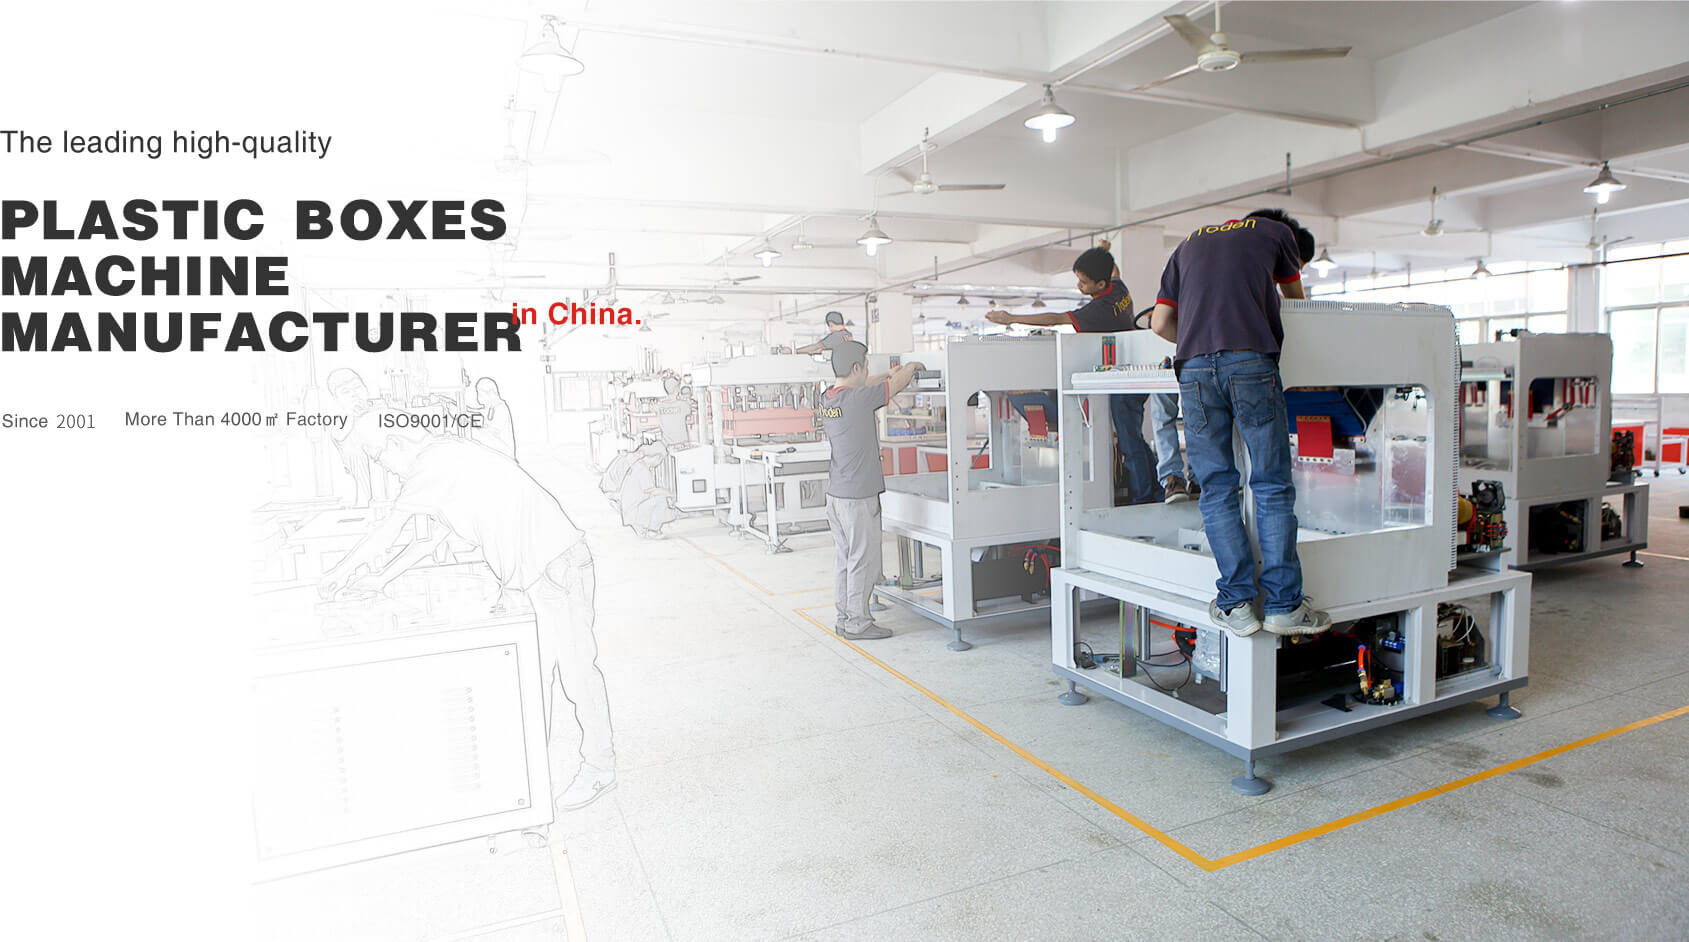 The leading high-quality plastic boxes machine manufacturer in China.